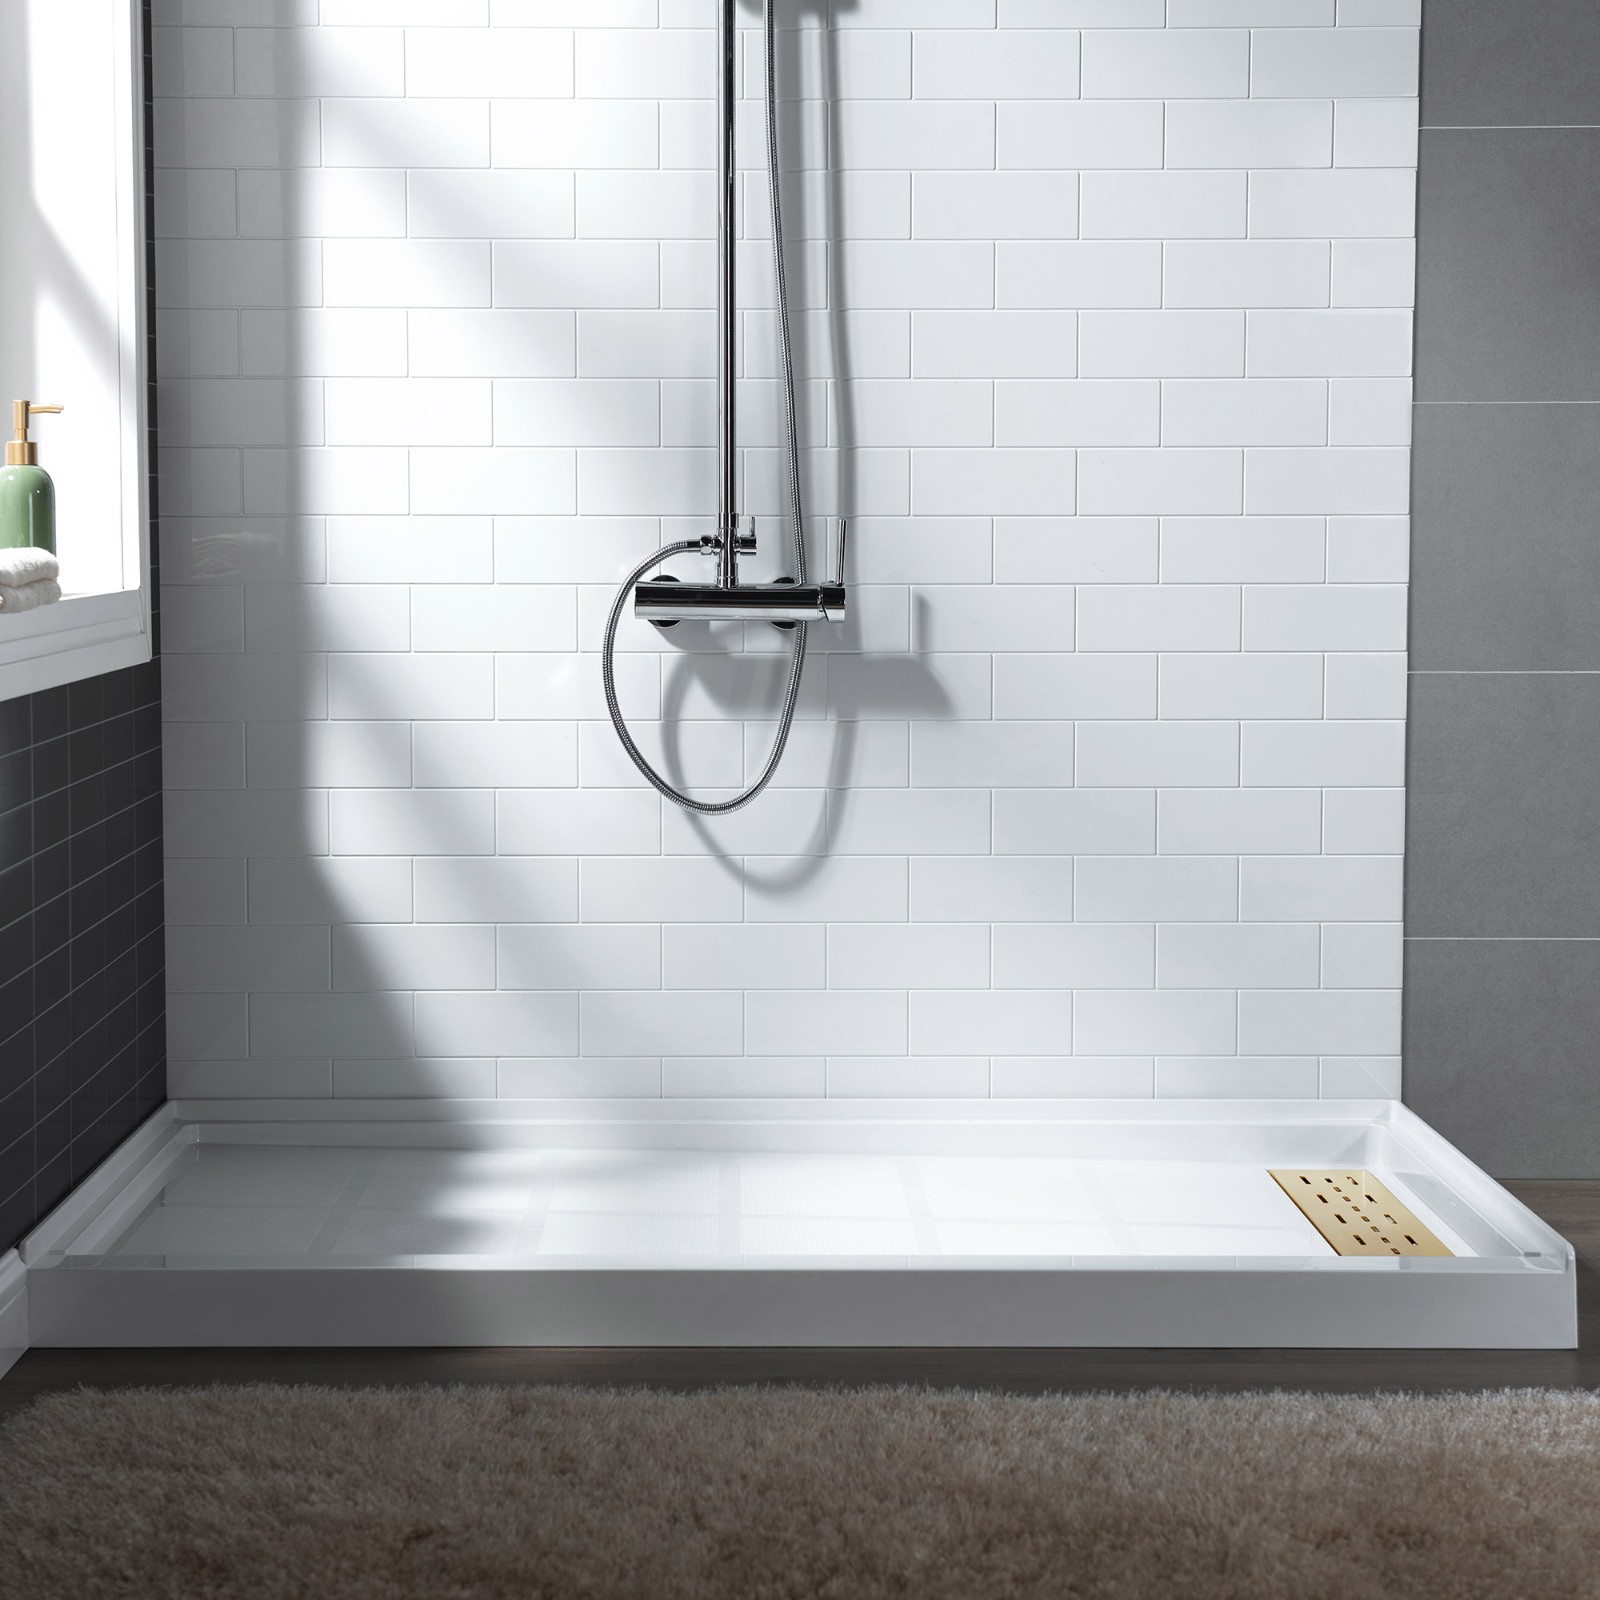  WOODBRIDGE SBR6036-1000R-BG SolidSurface Shower Base with Recessed Trench Side Including Brushed Gold Linear Cover, 60